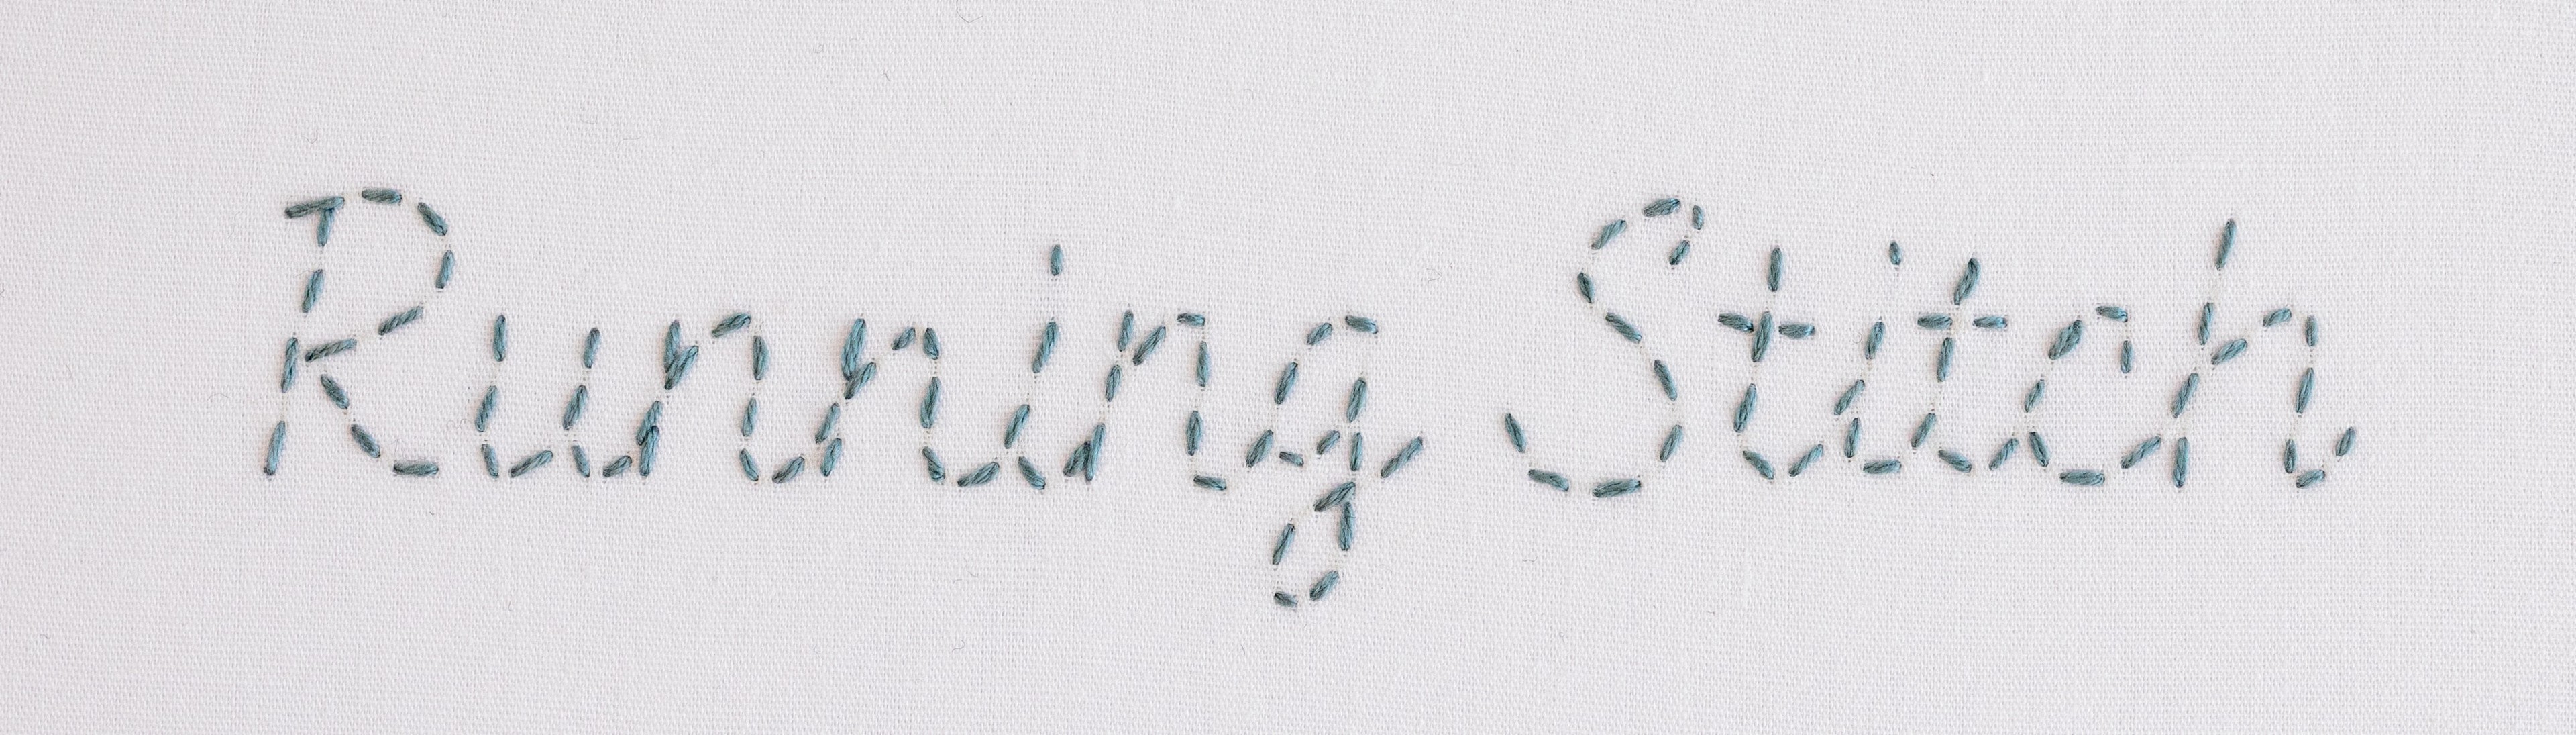 This is the word 'running stitch' is stitched using running stitch.